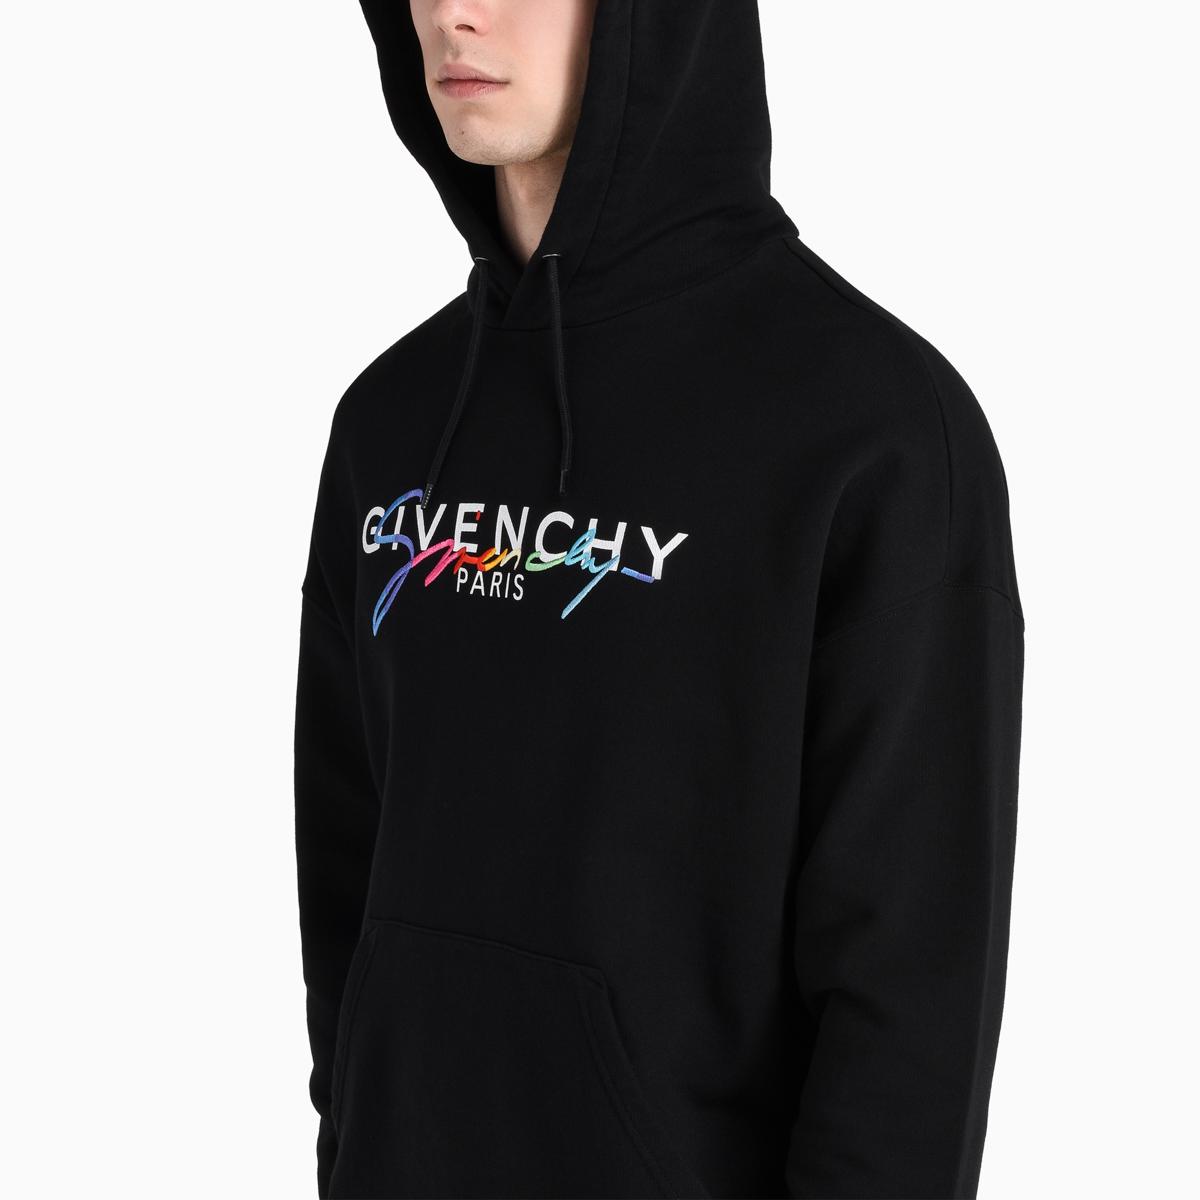 Givenchy Cotton Rainbow Hoodie in Black for Men - Lyst